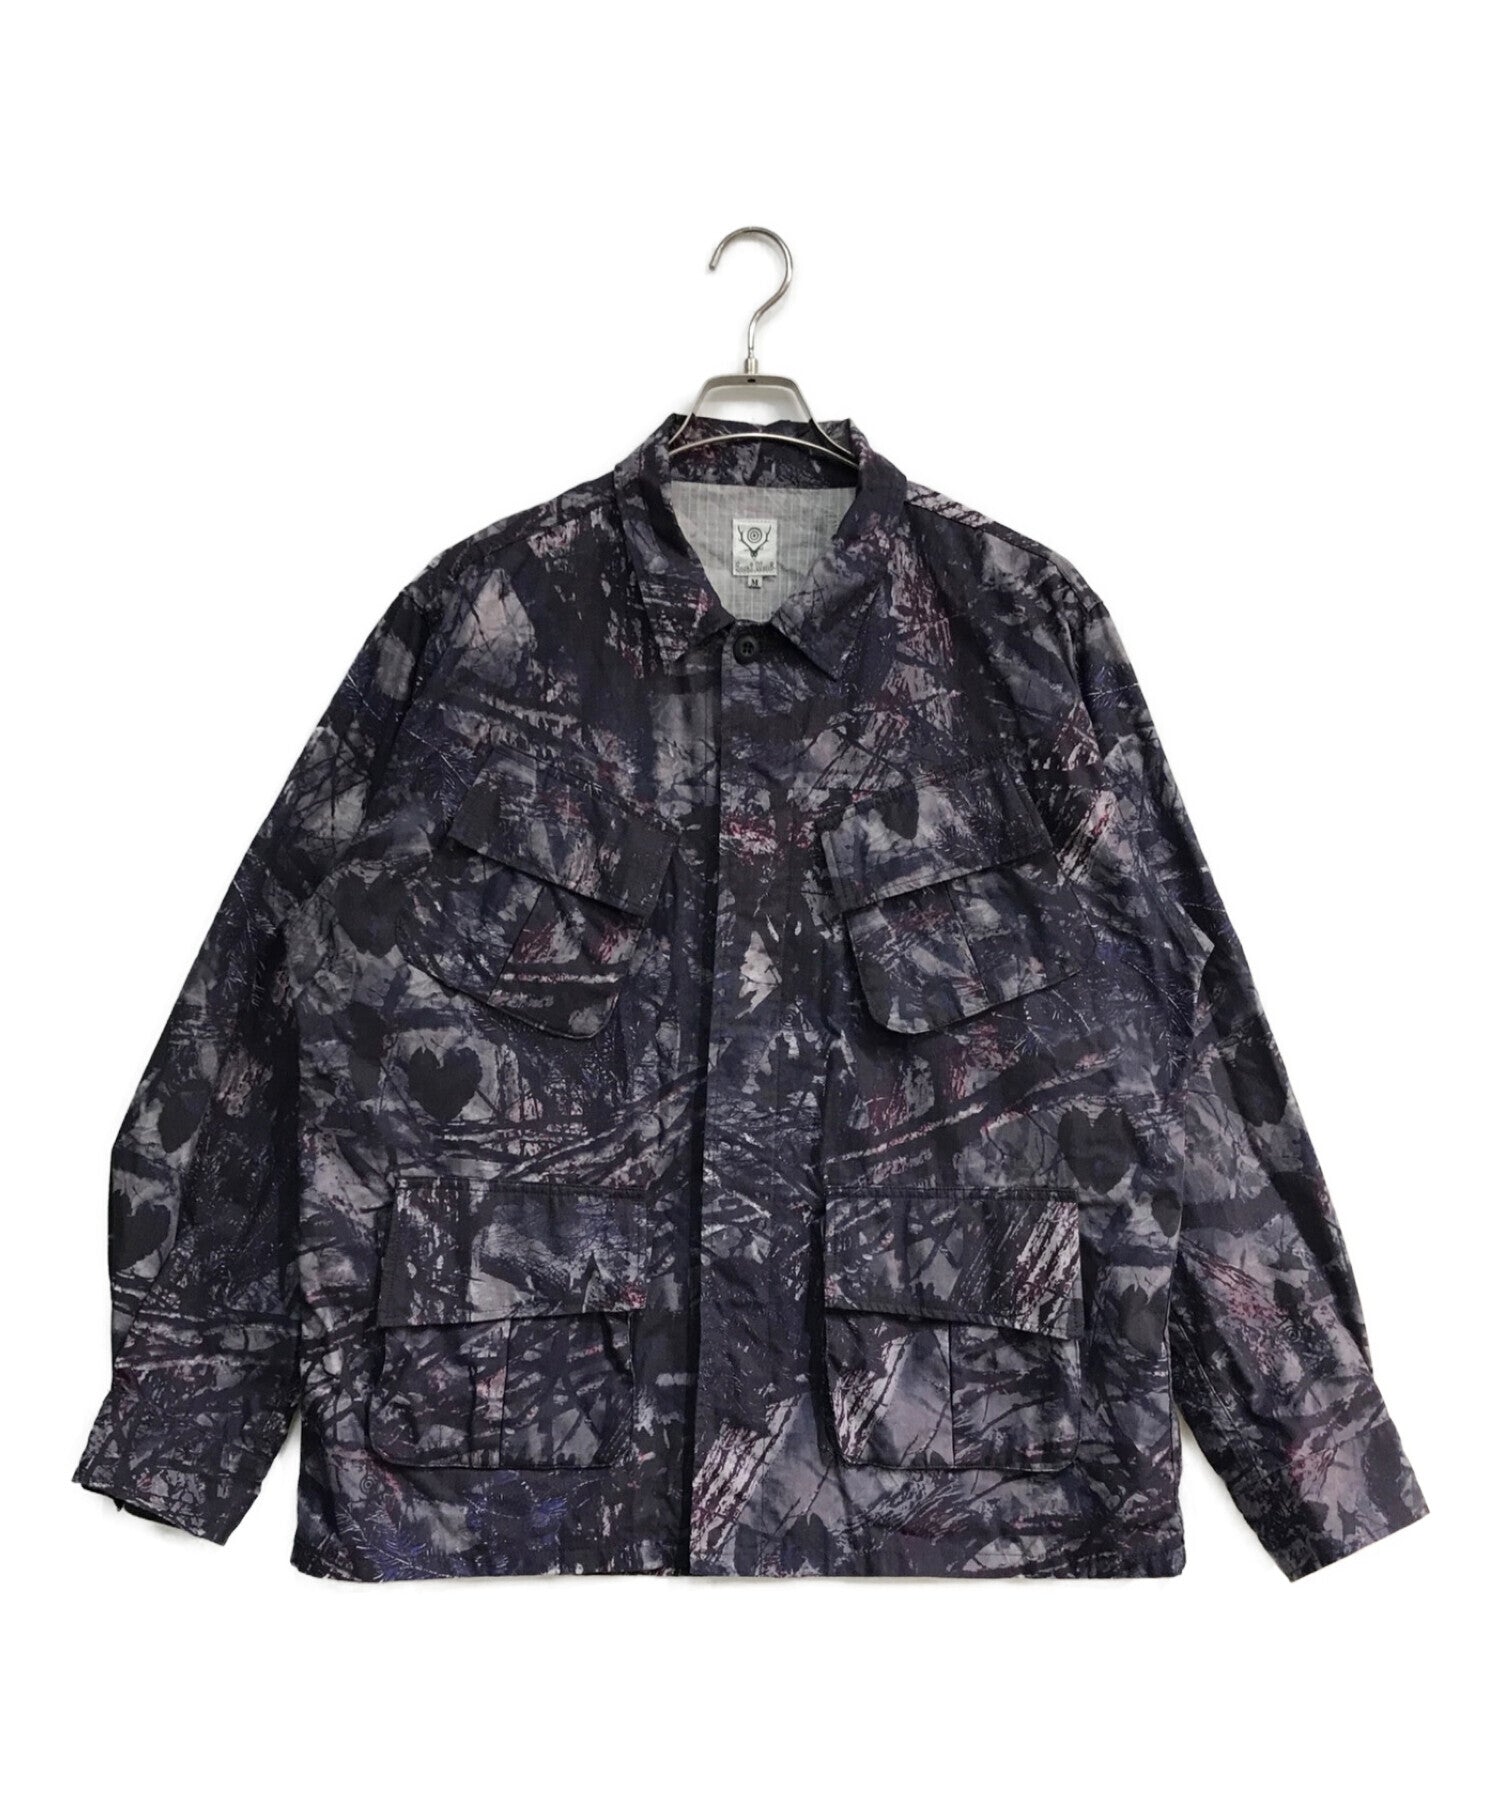 South2 West8 JUNGLE FATIGUE JACKET IN803 IN803